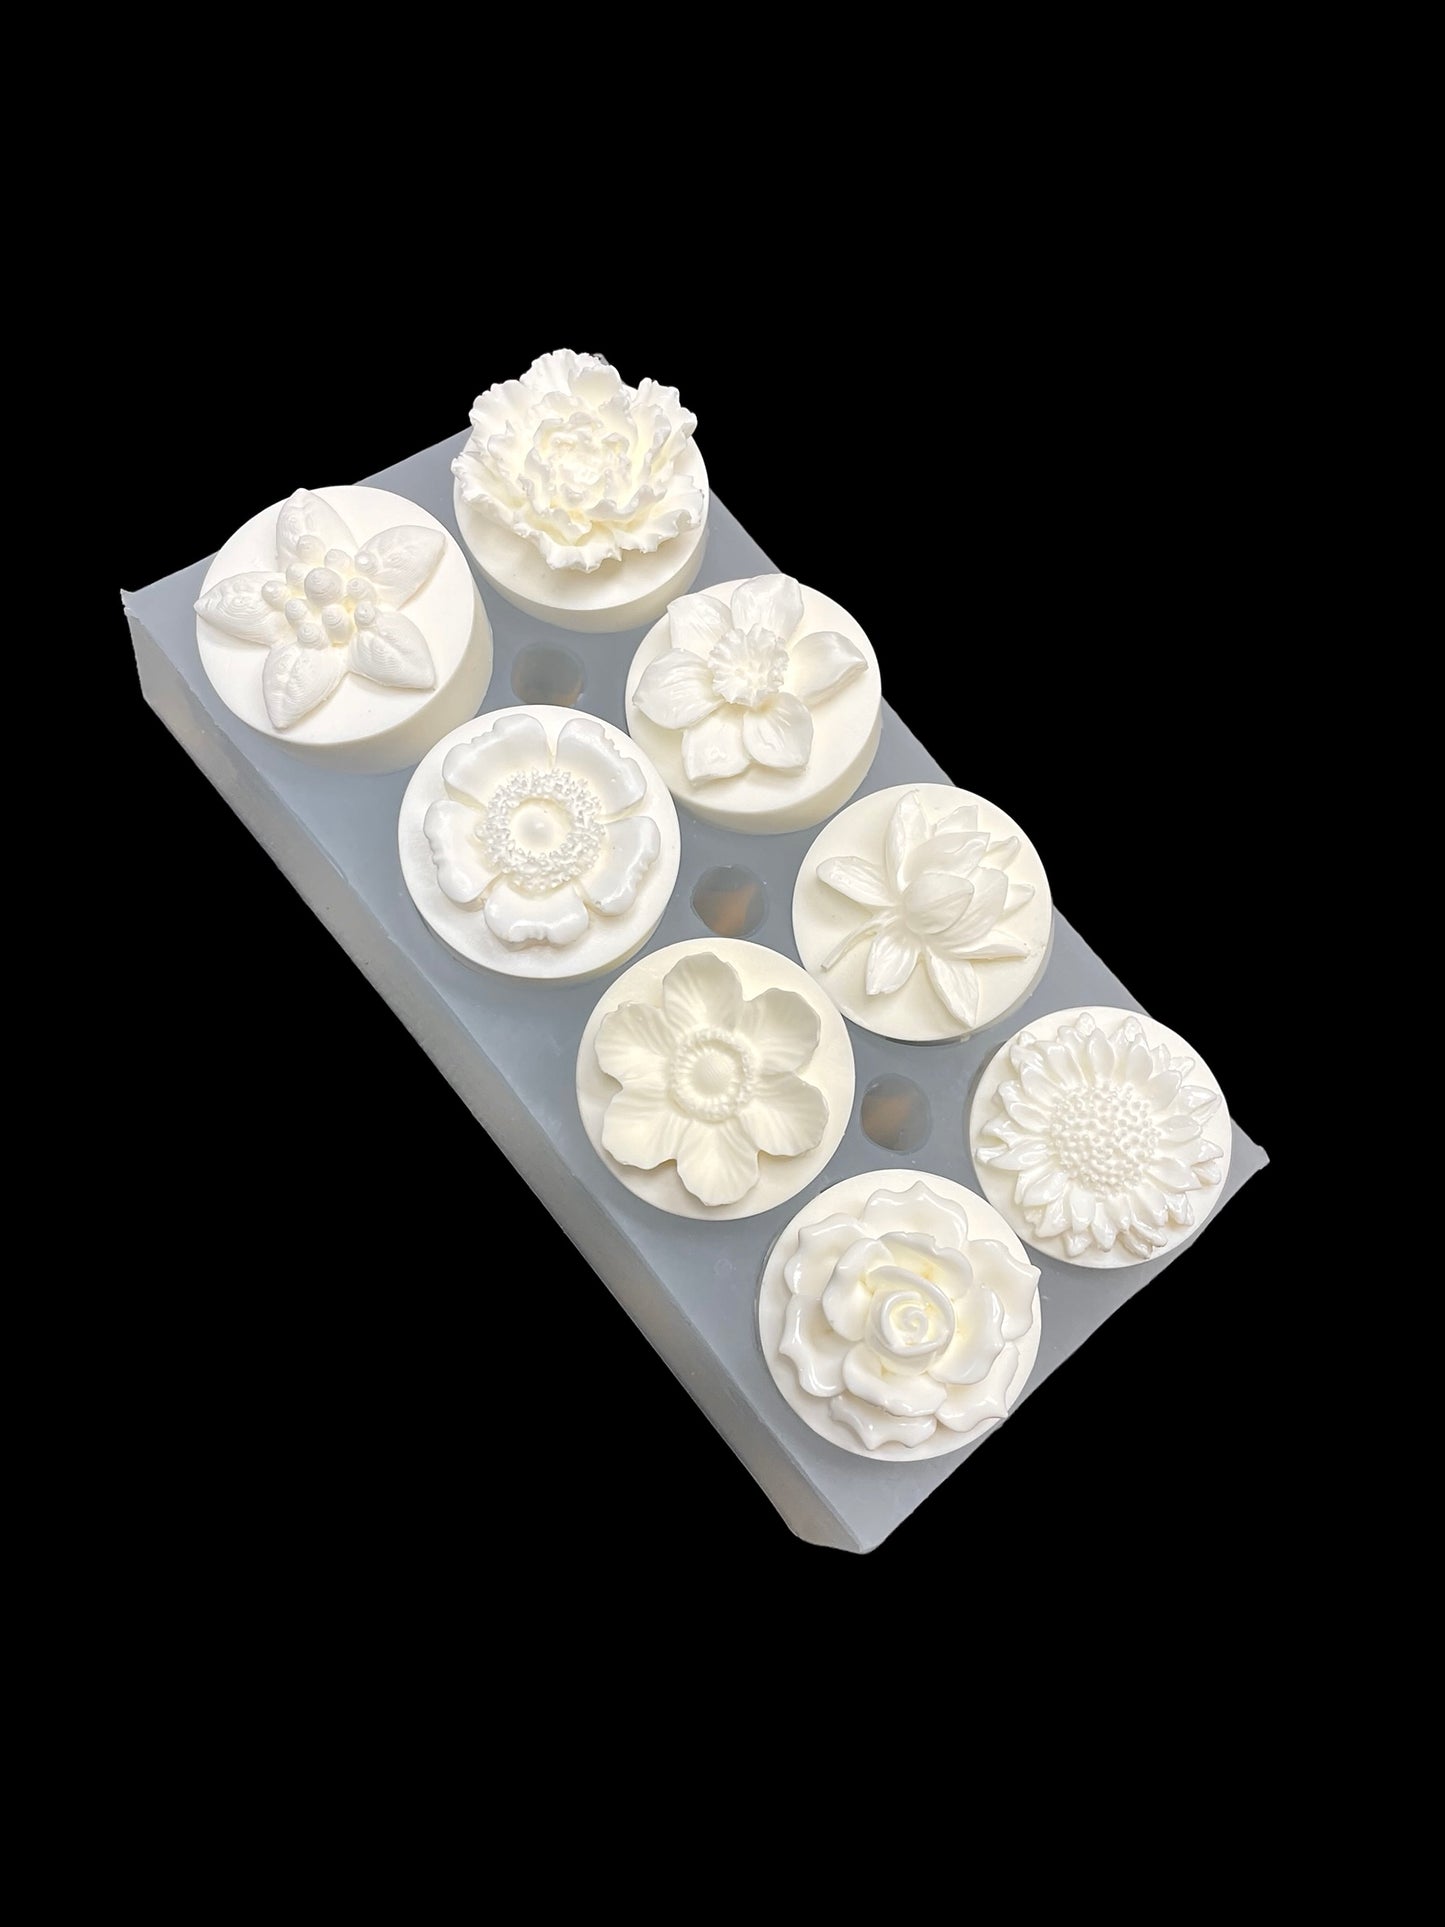 Silicone tealight candle mold with 8 assorted flowers